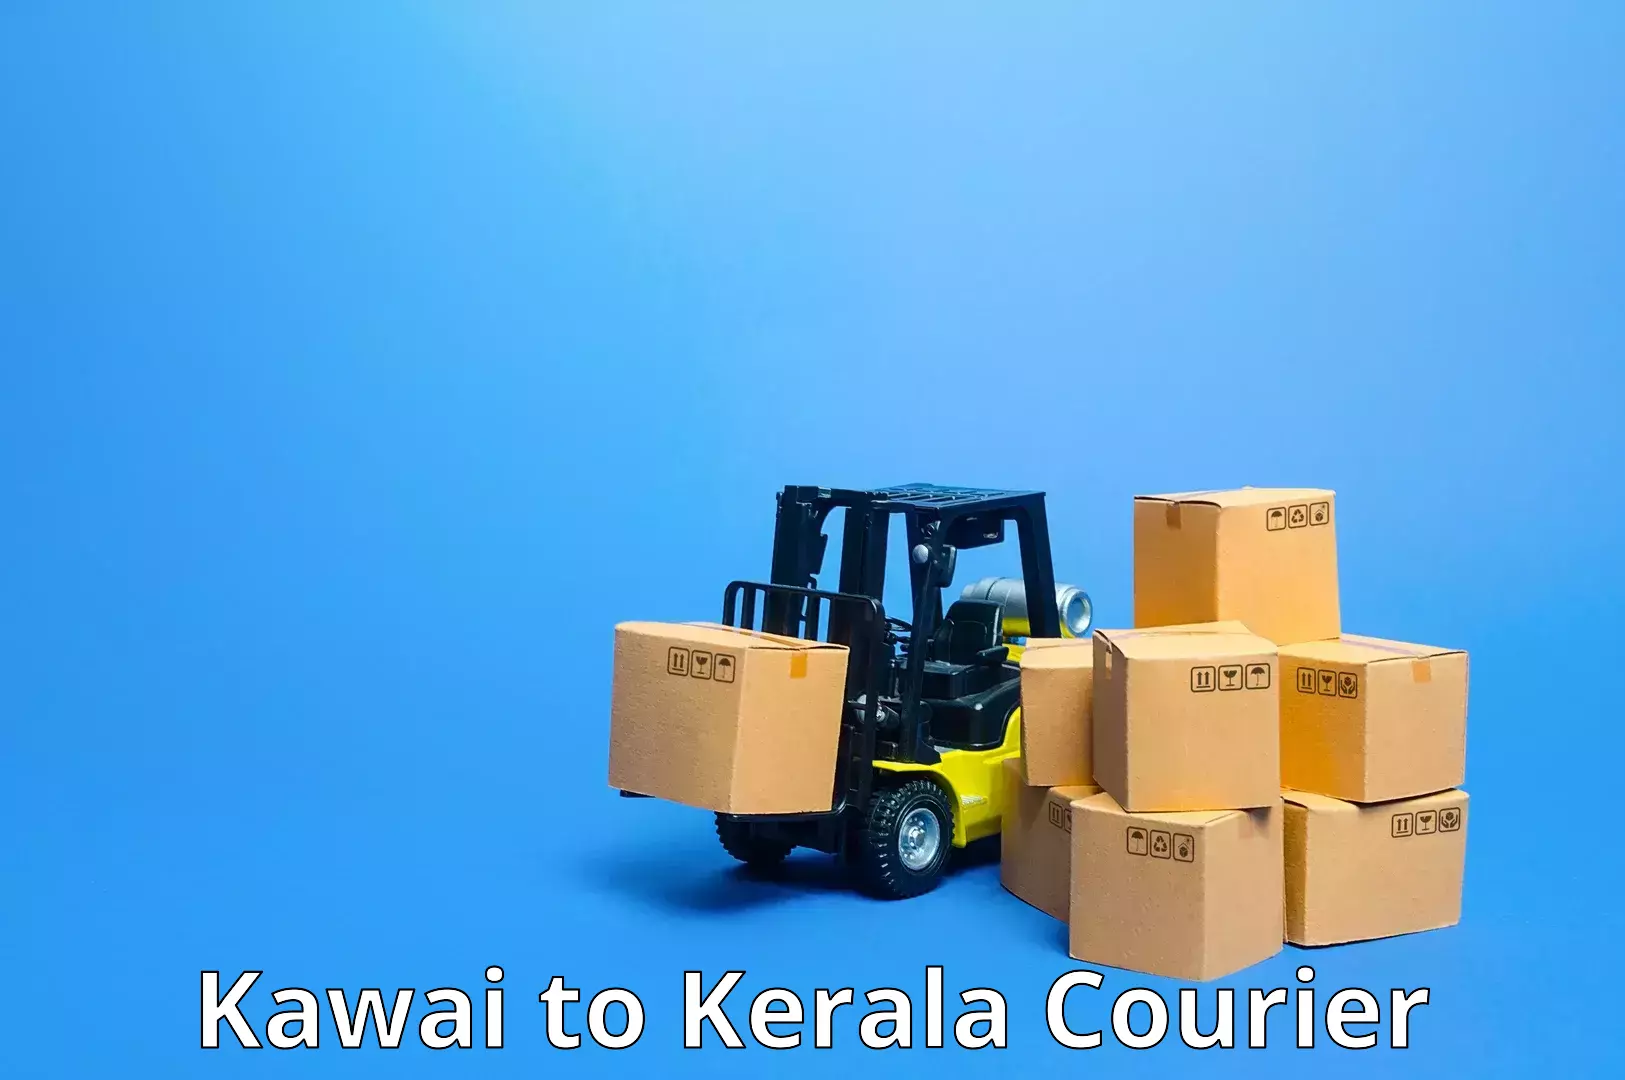 State-of-the-art courier technology Kawai to Kerala